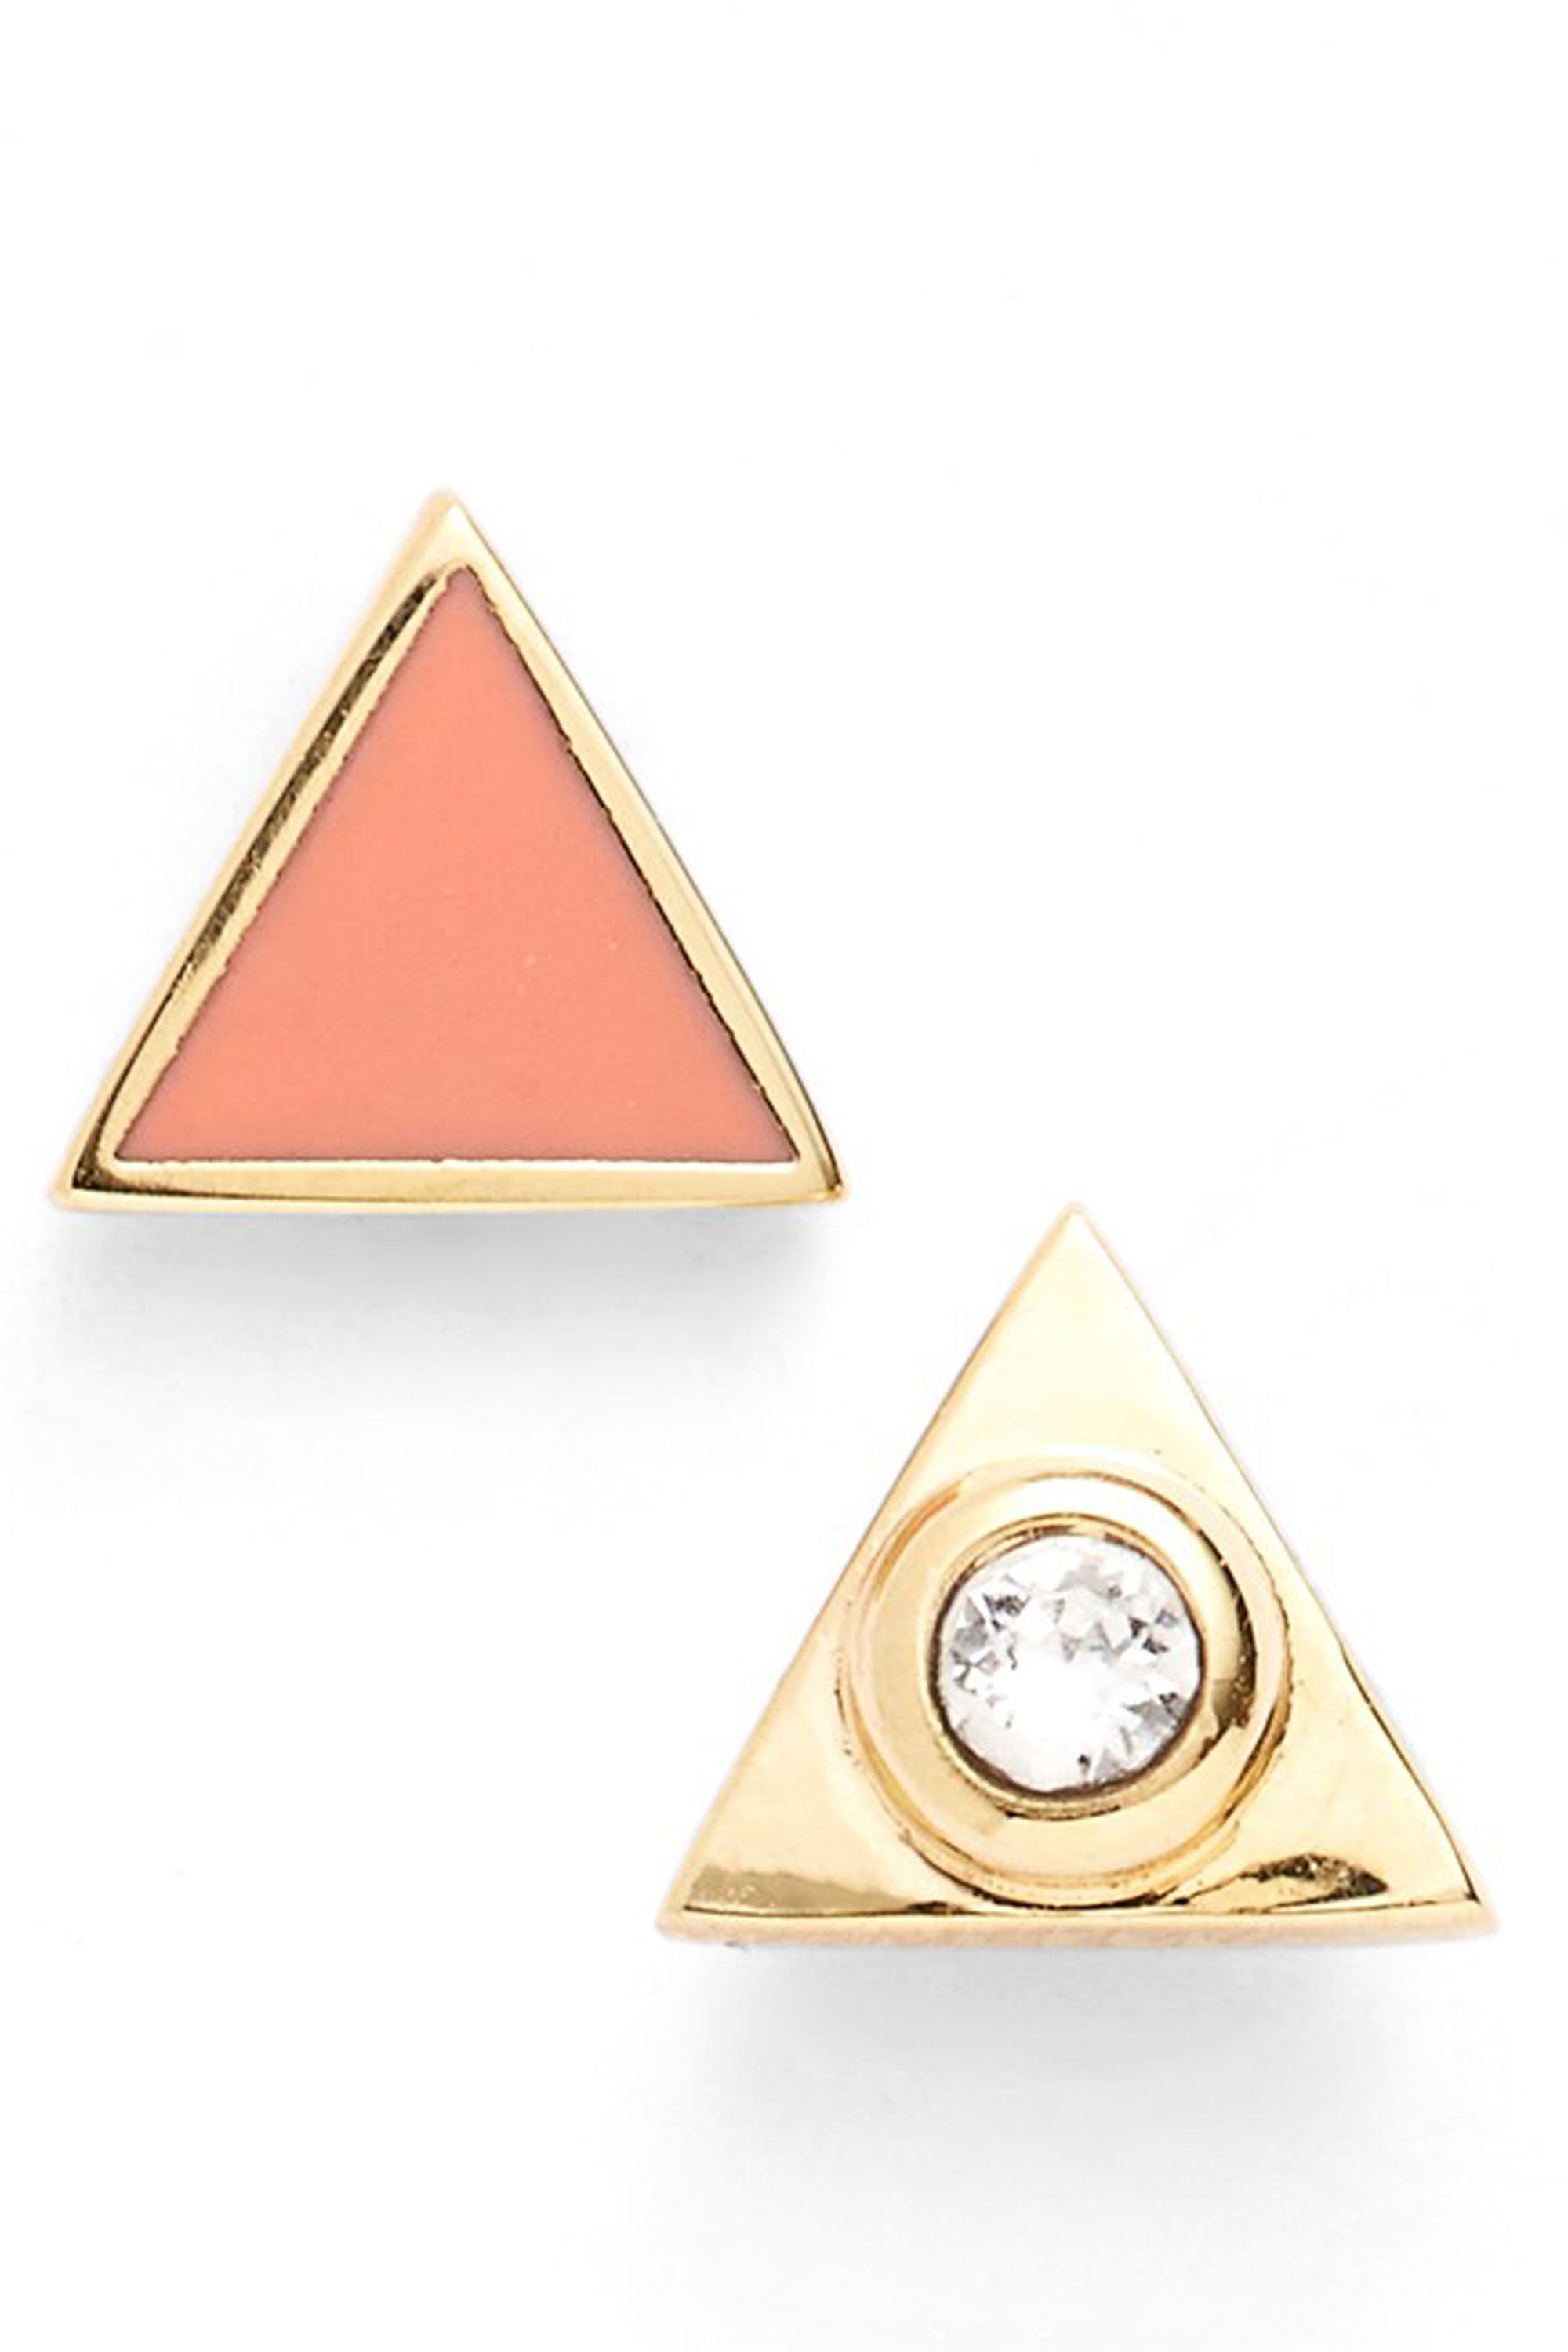 Mismatched Earrings Teen Fashion Red Triangle and Diamond